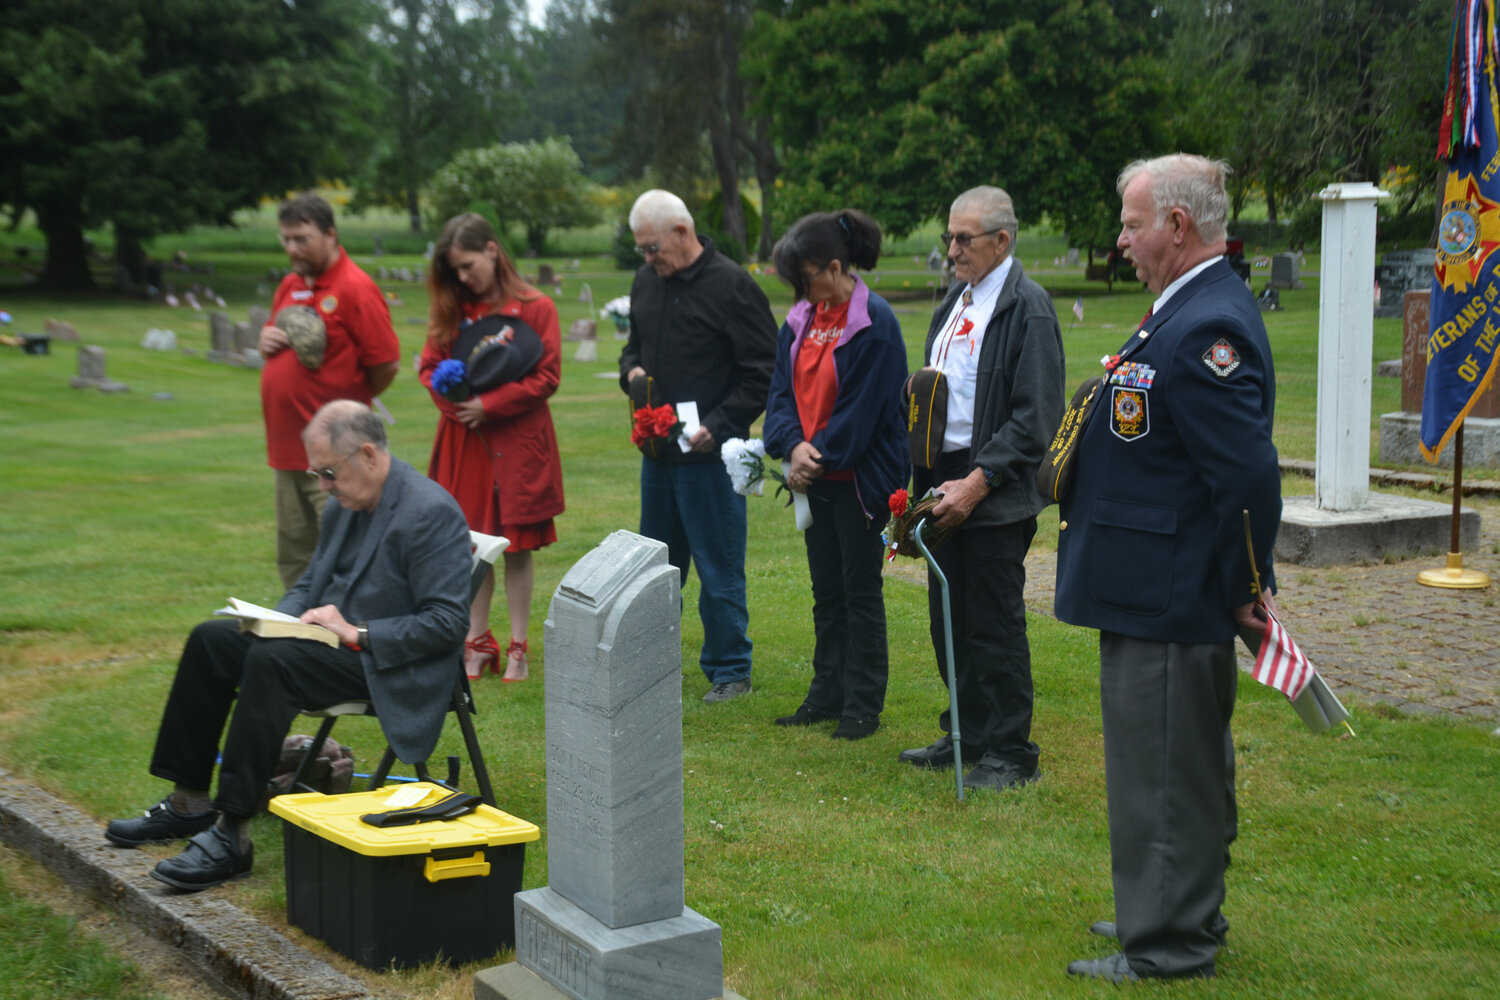 Event organizers bow their heads as James A. Smith leads a prayer at a Memorial Day ceremony at the Yelm Cemetery on Monday, May 29.